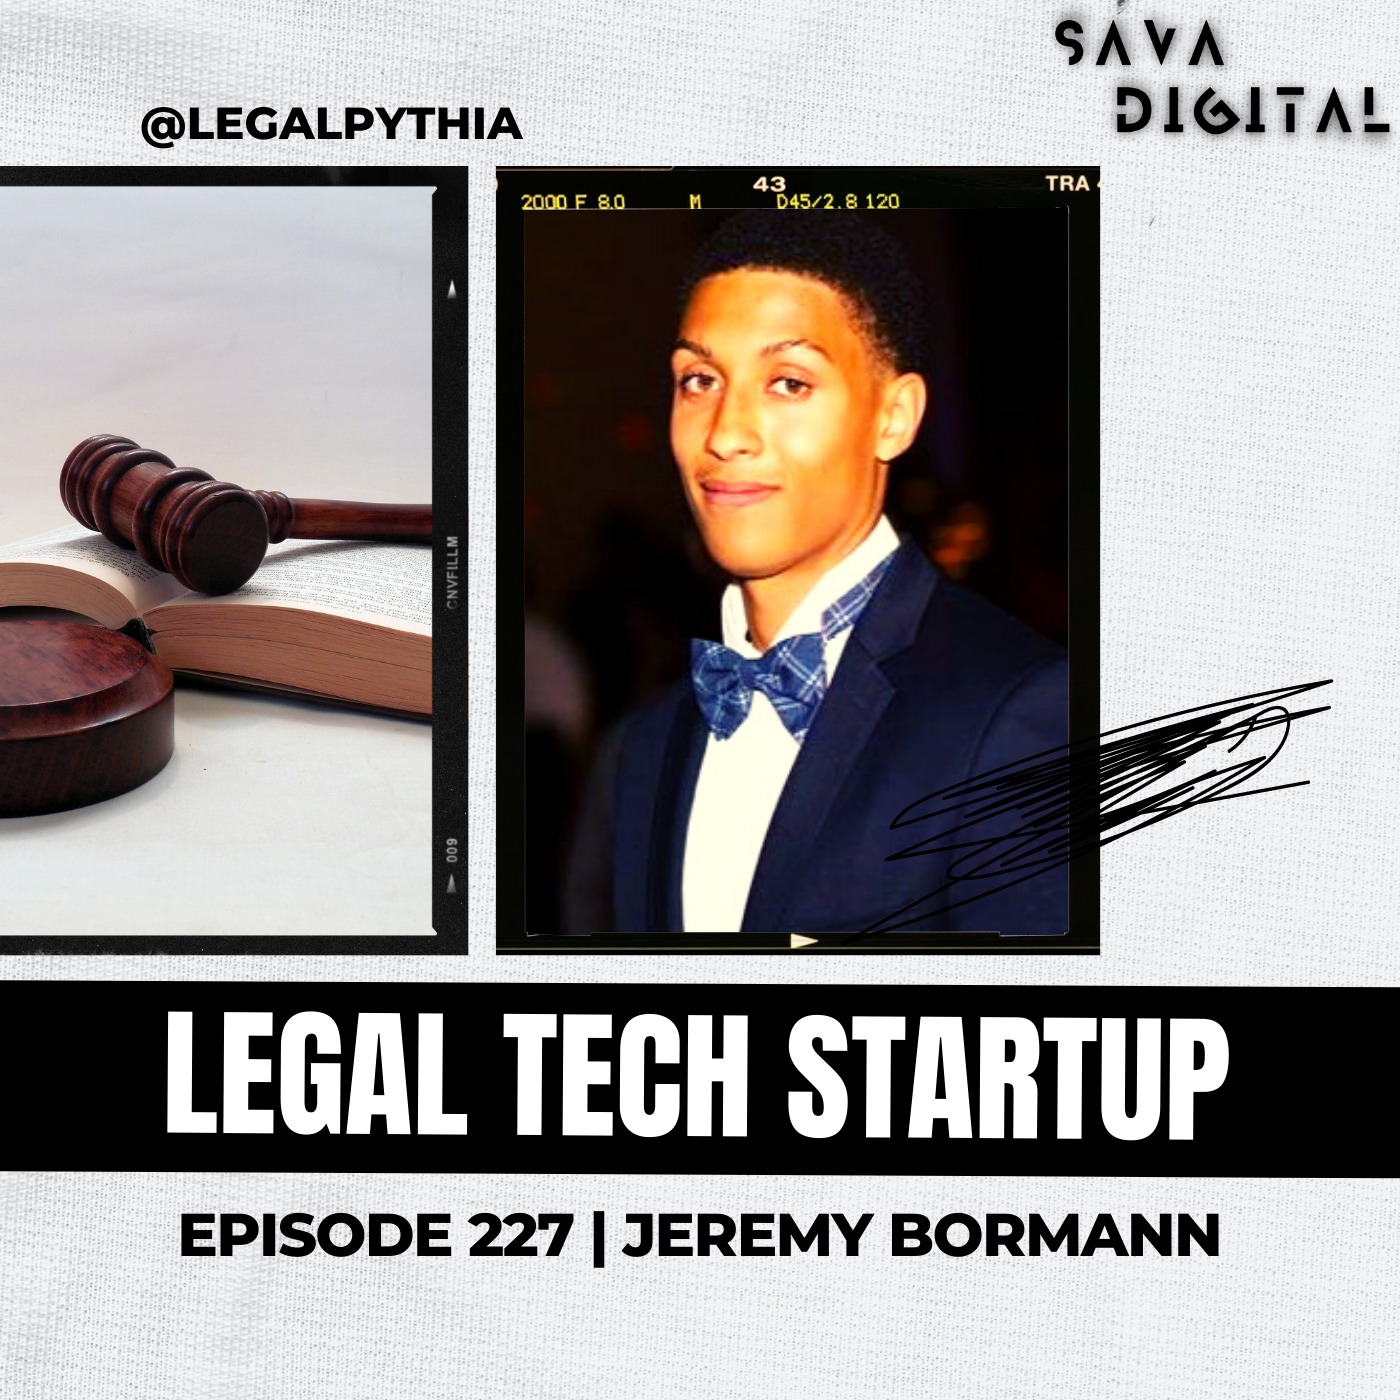 EP 227 : Ebbs and Flows of a Legal Tech Startup | Jeremy Bormann